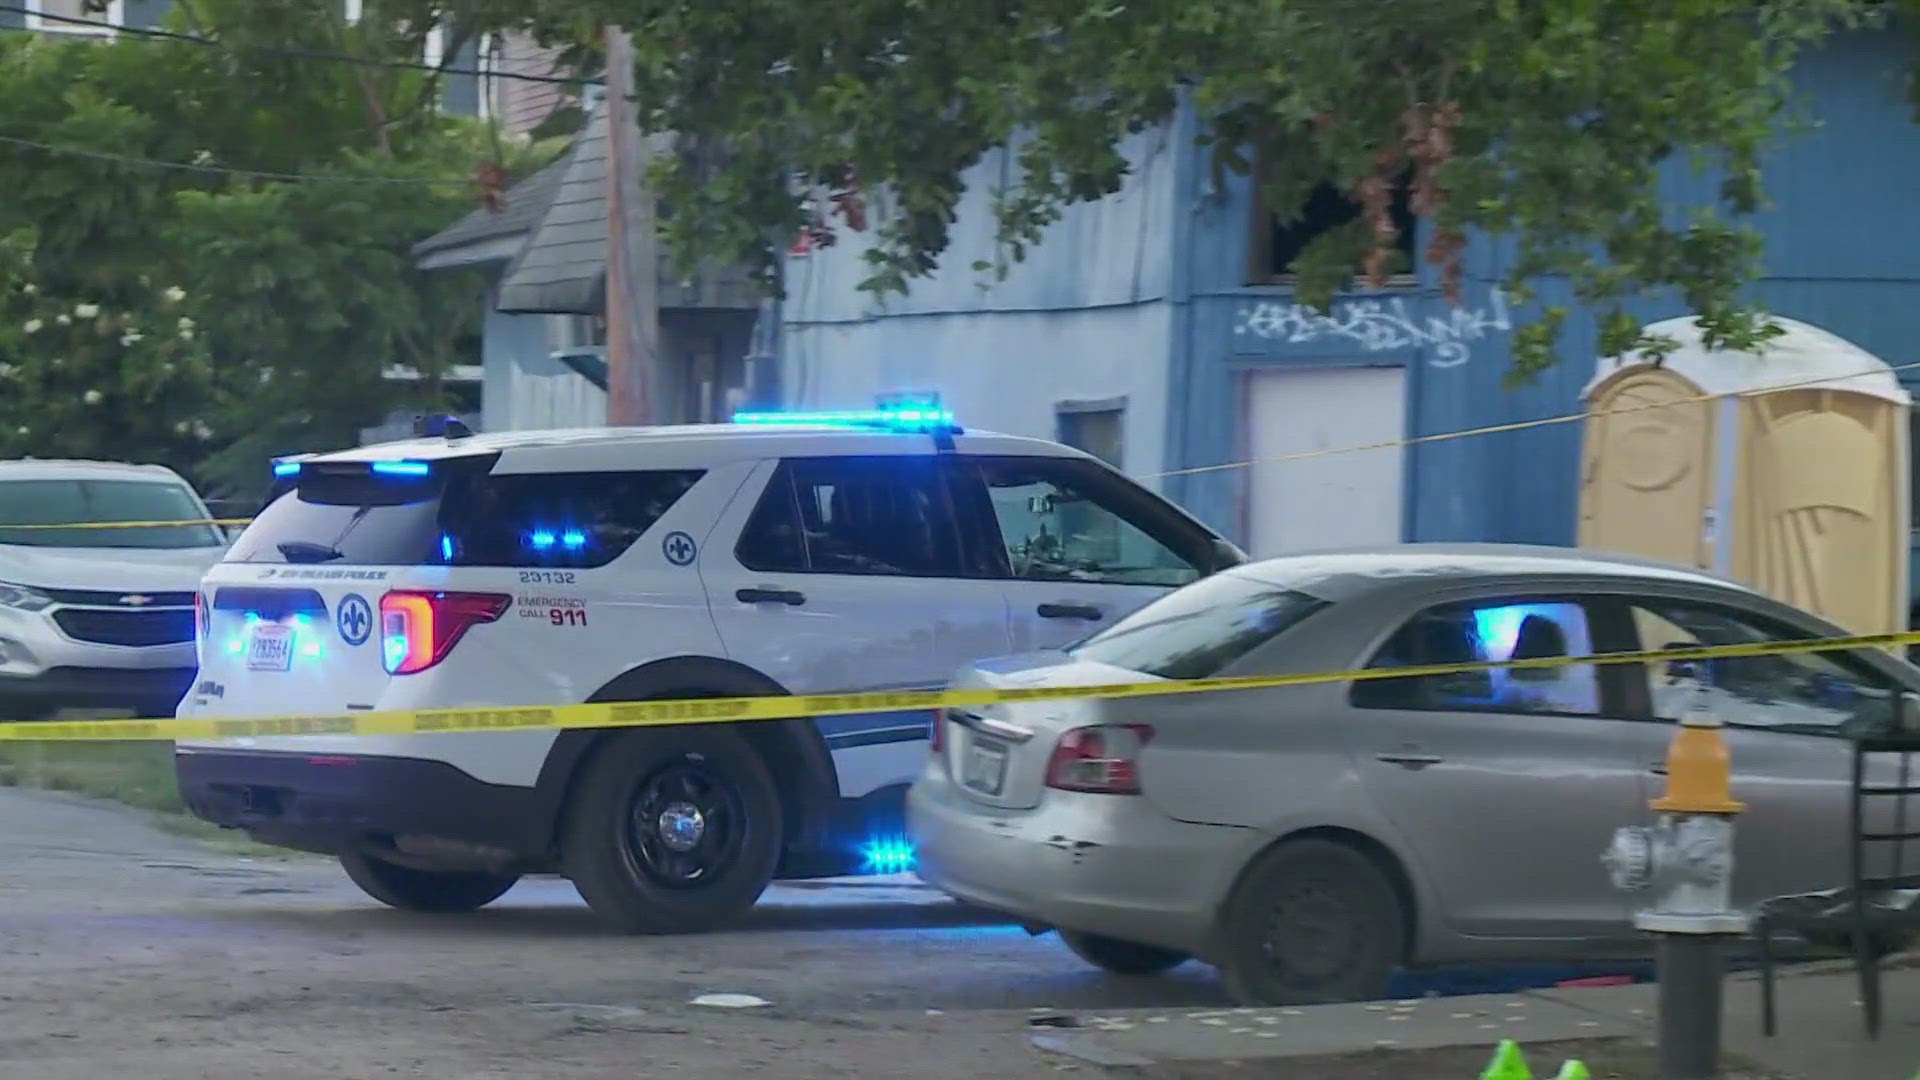 NOPD said they responded to a report of shots fired in the area around 5:43 p.m. The victim was taken to a nearby hospital where they later died.